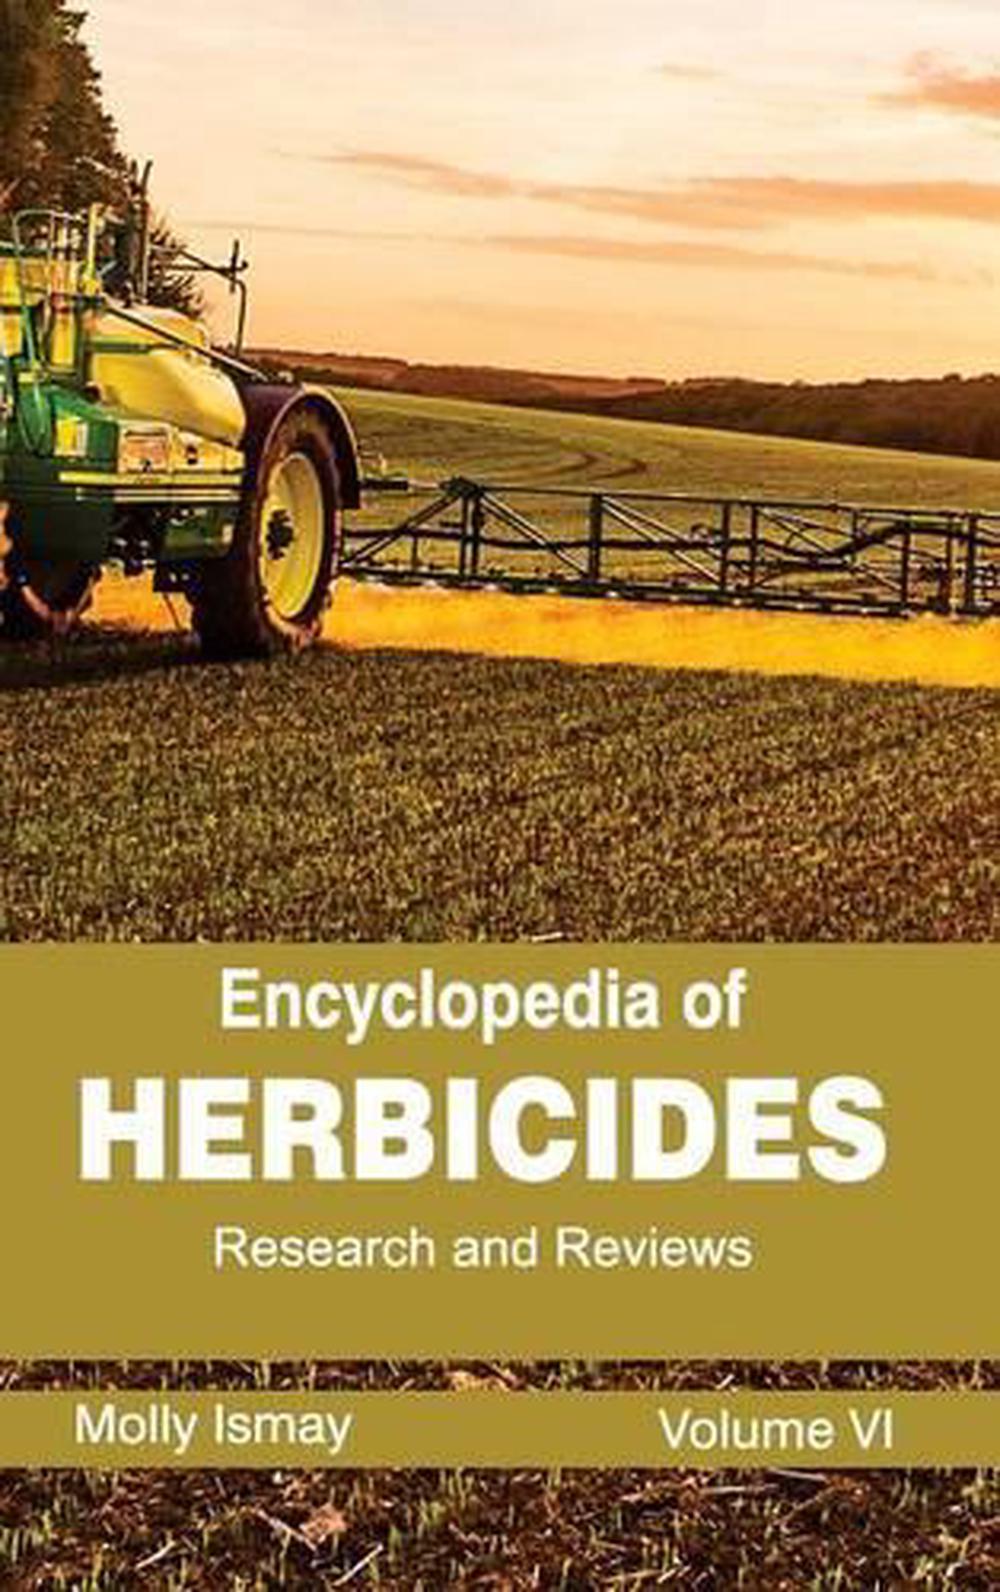 herbicides current research and case studies in use